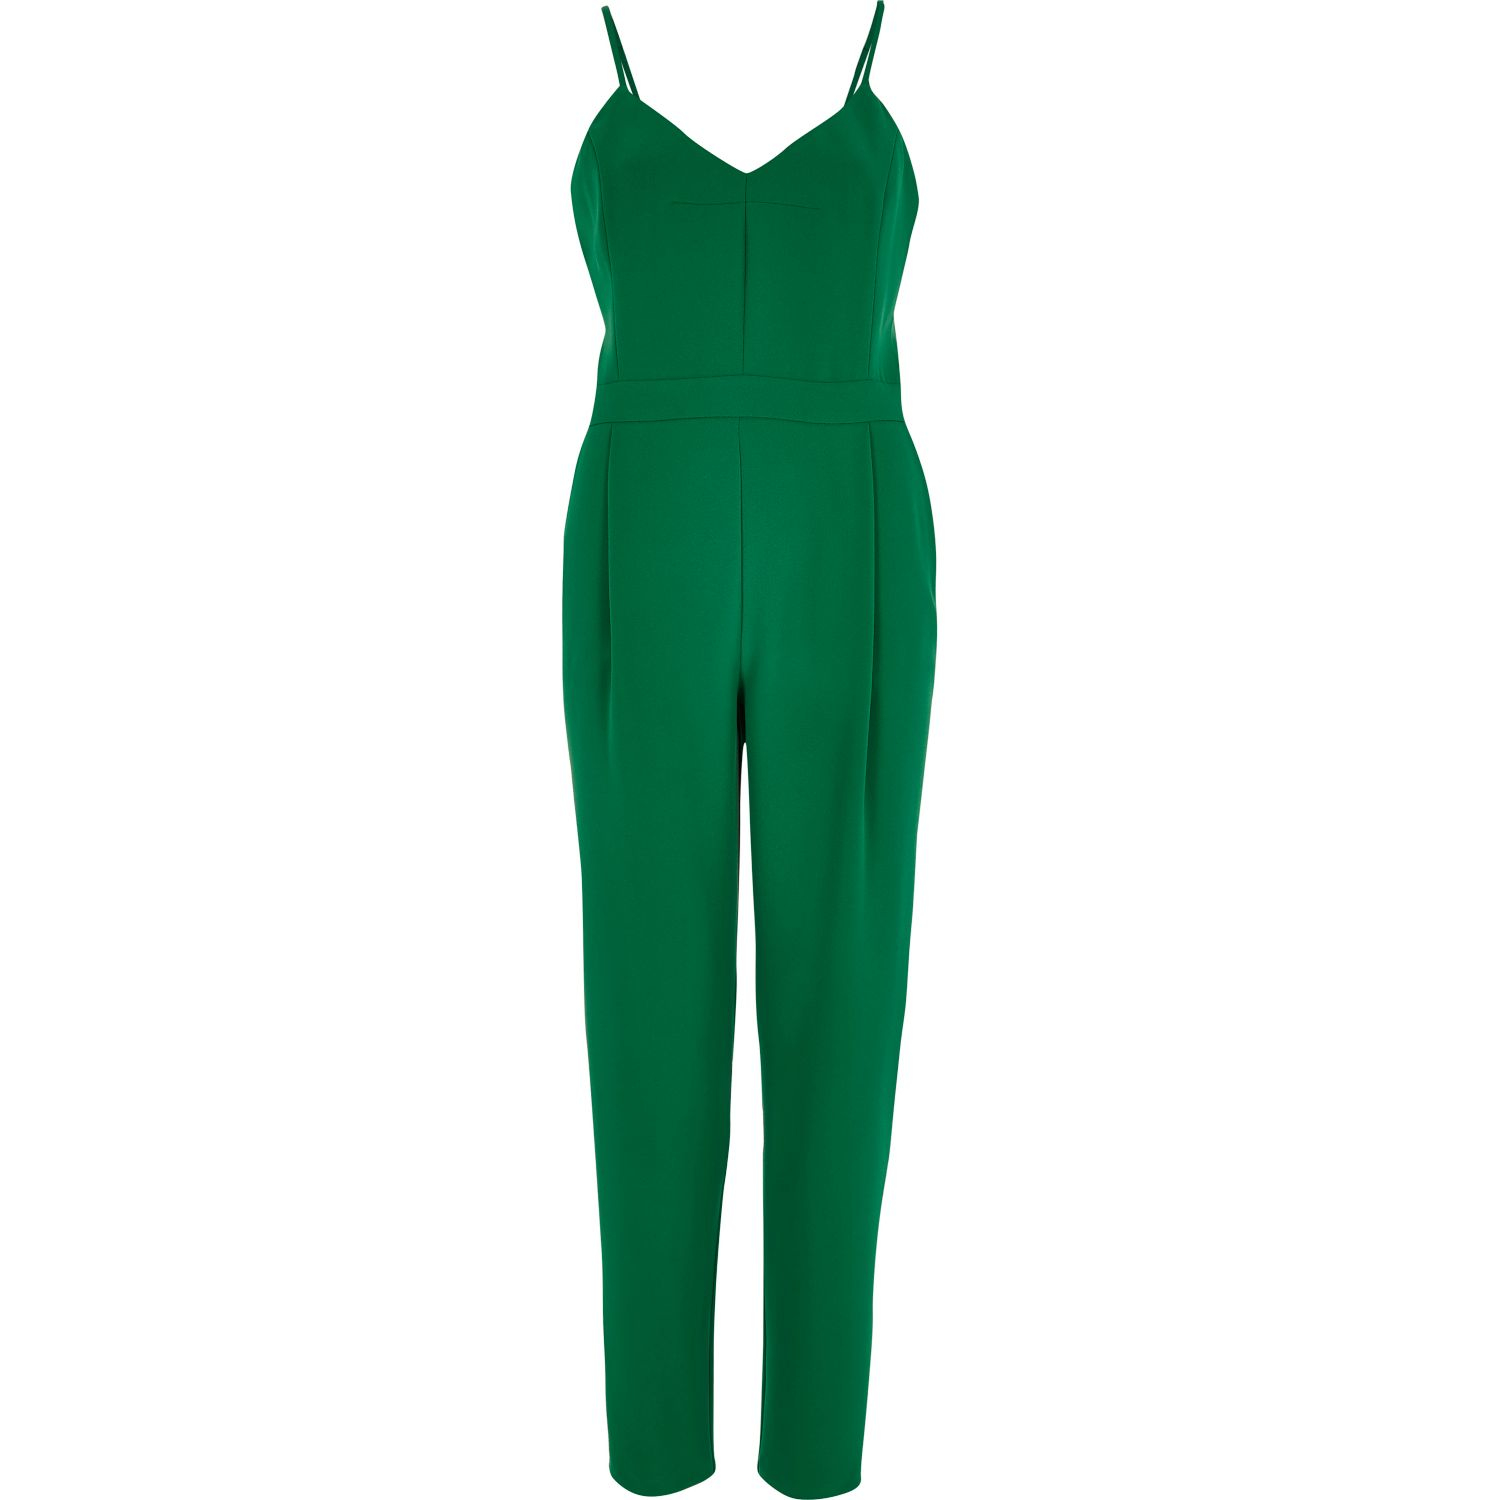 Lyst - River Island Green Tapered Jumpsuit in Green